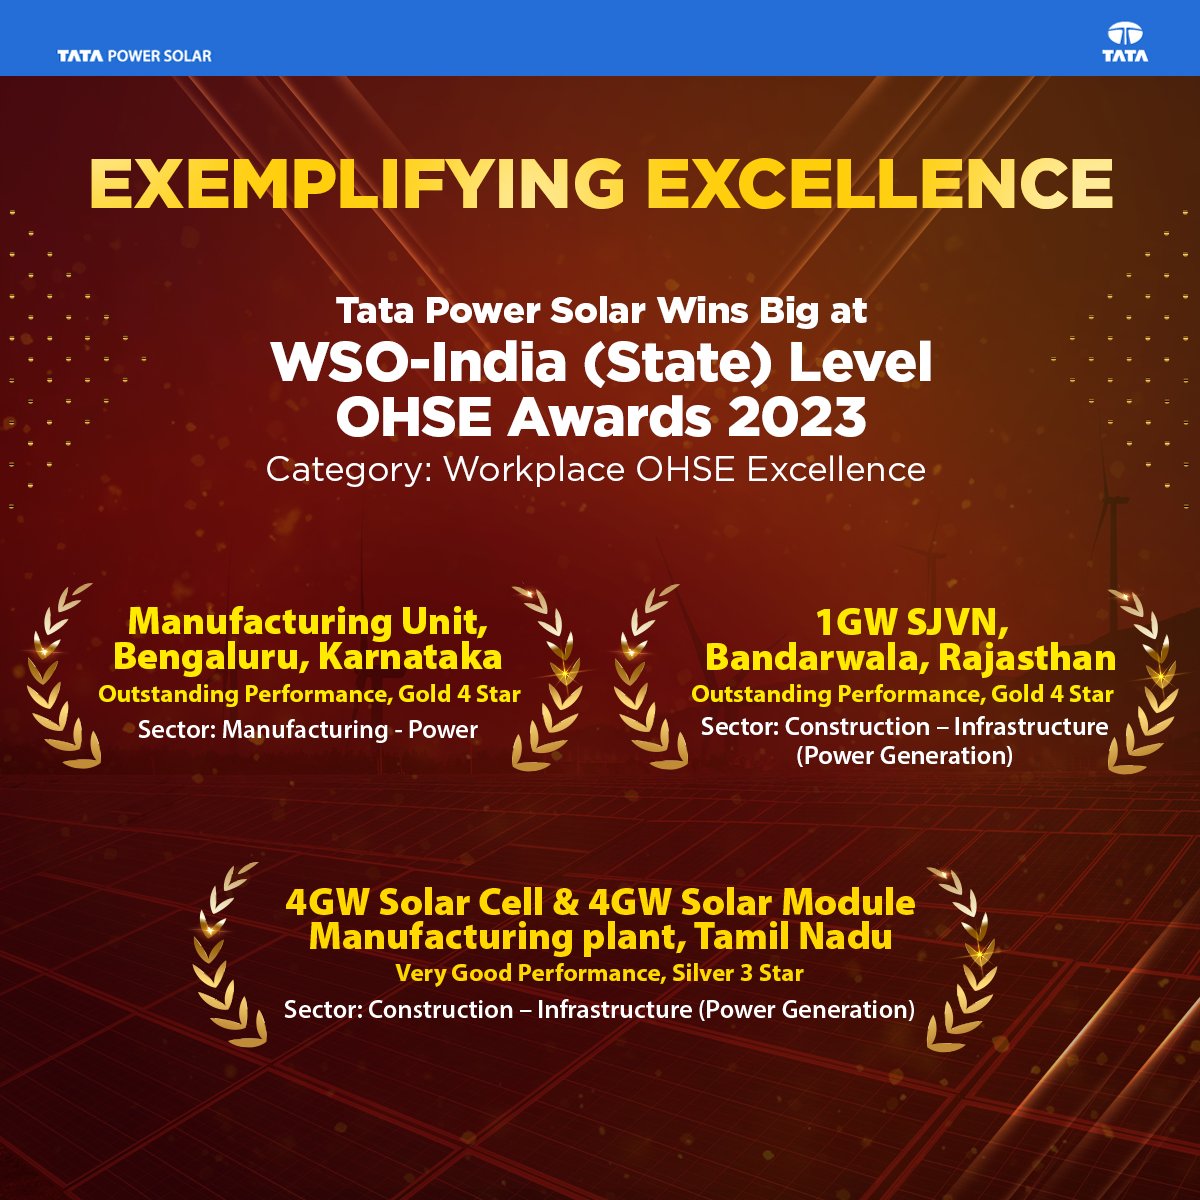 Proud to share that Tata Power Solar has won three awards in the category of Workplace Excellence at the 2nd edition of the prestigious World Safety Organisation-India (State) Level OHSE Awards 2023 for outstanding performance in manufacturing and construction sectors.